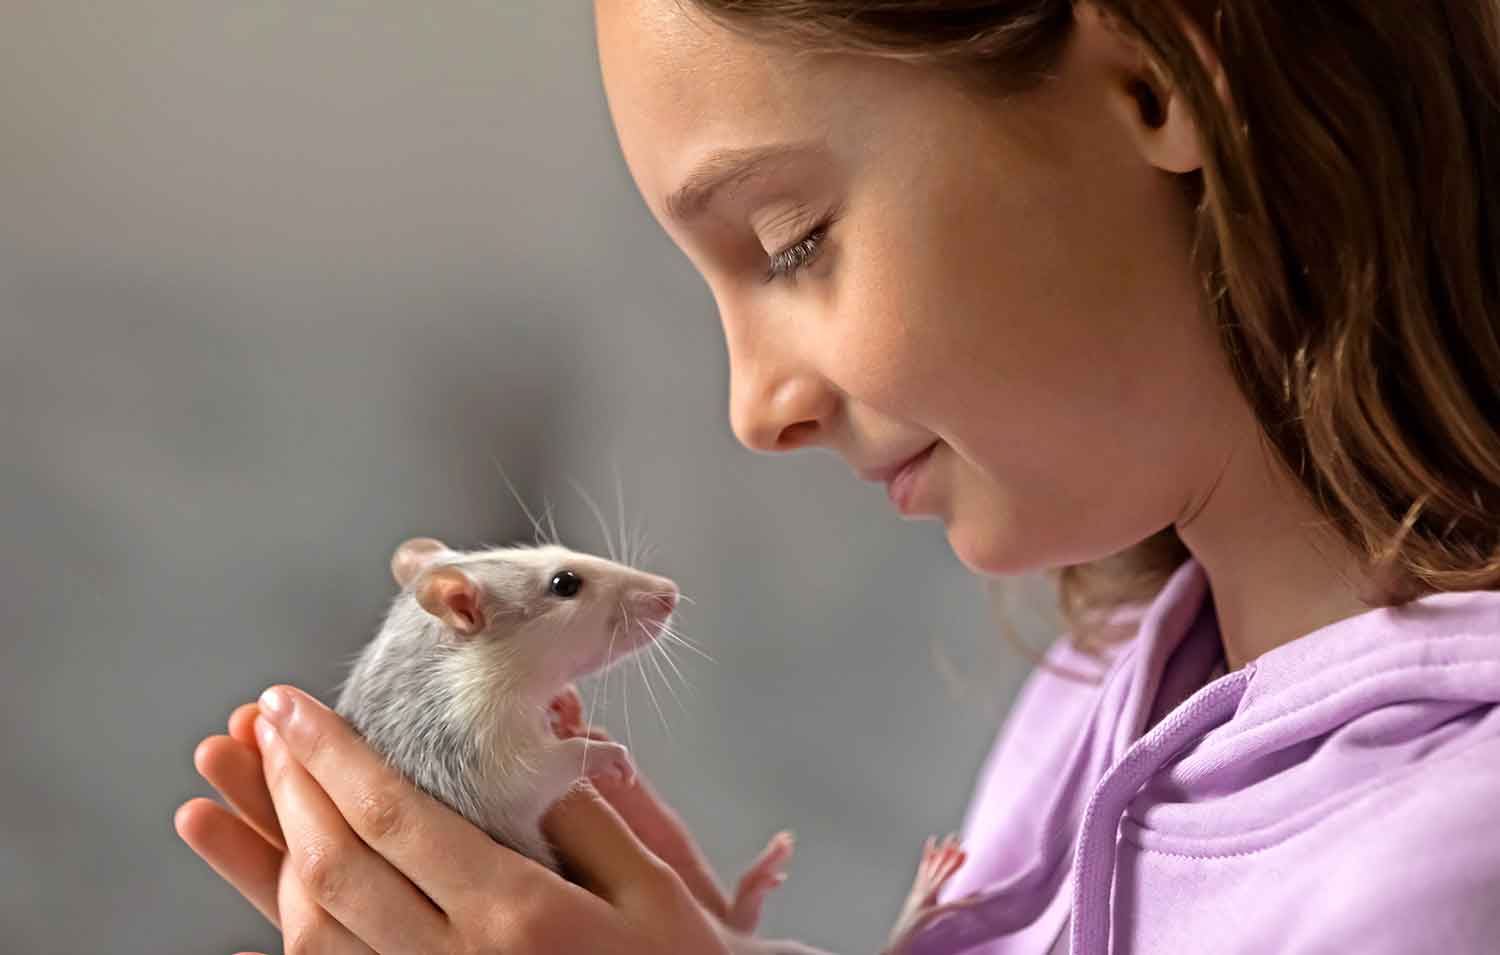 A teen holds a gray and white rat in her hands.